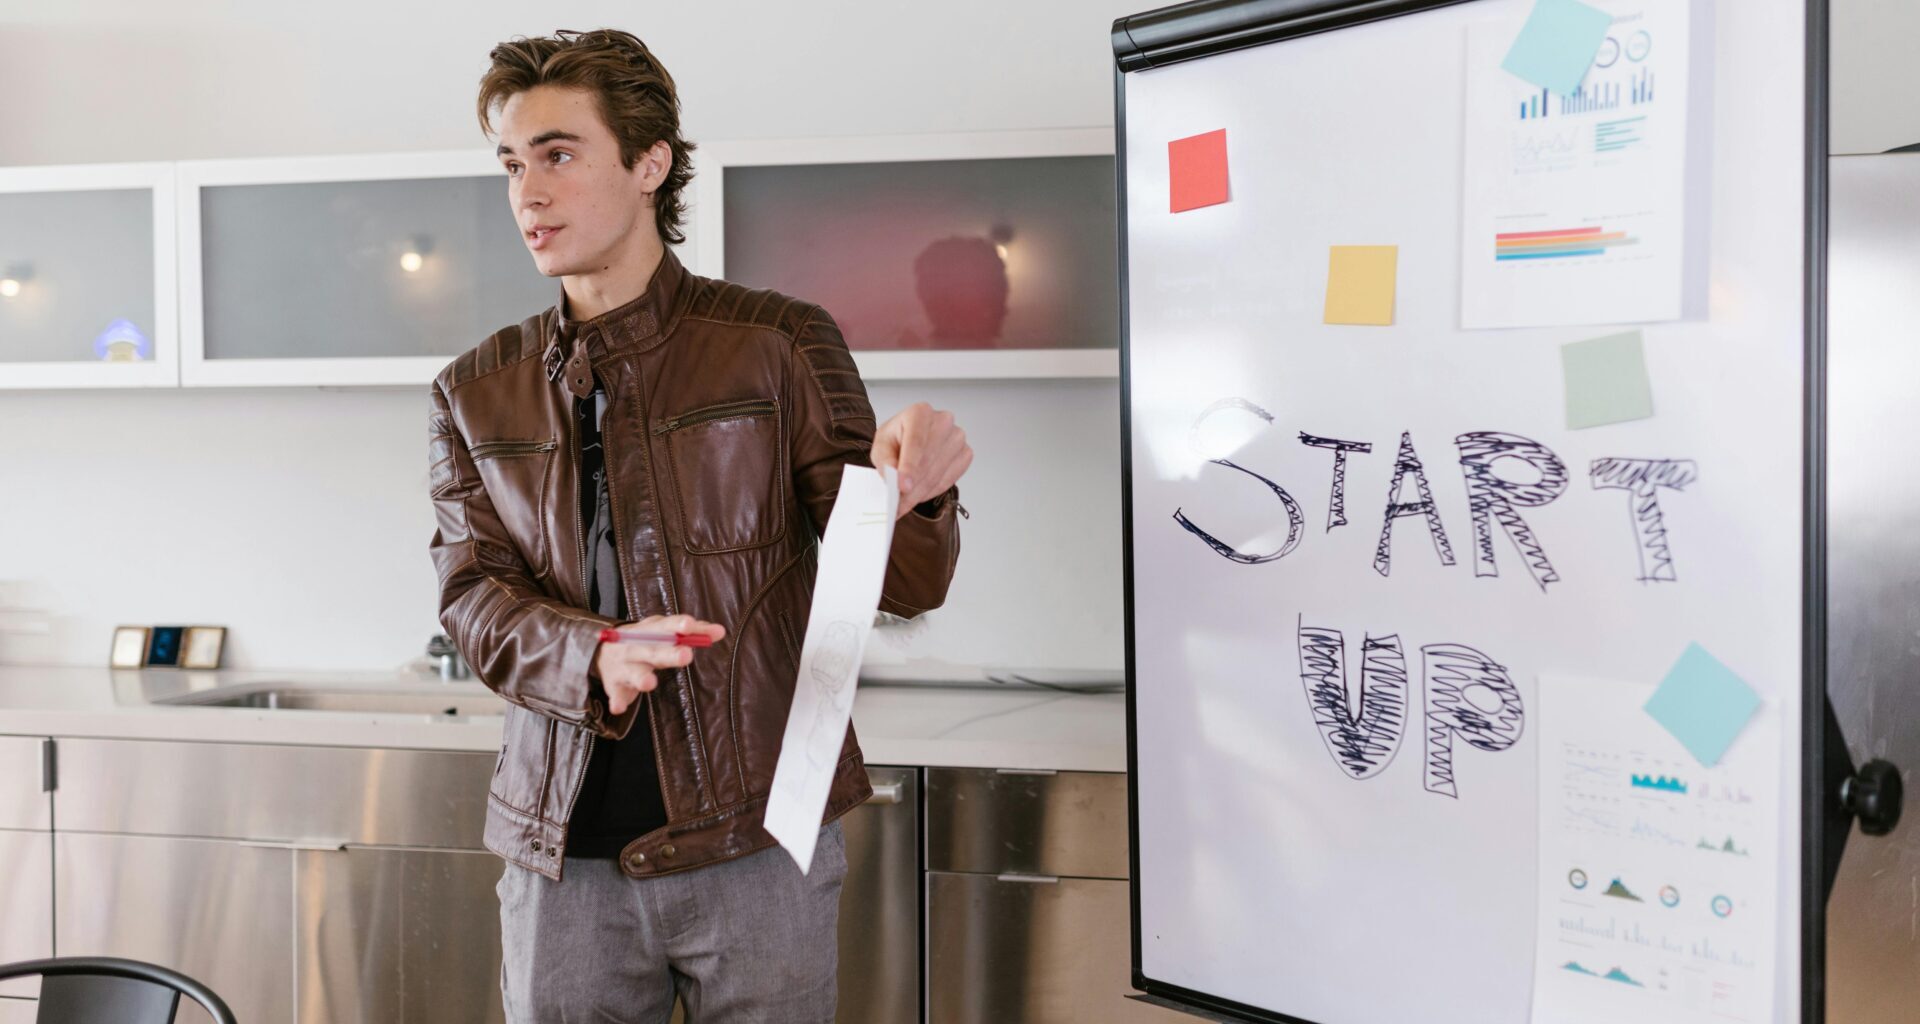 Young man in front of a whiteboard explaining a project